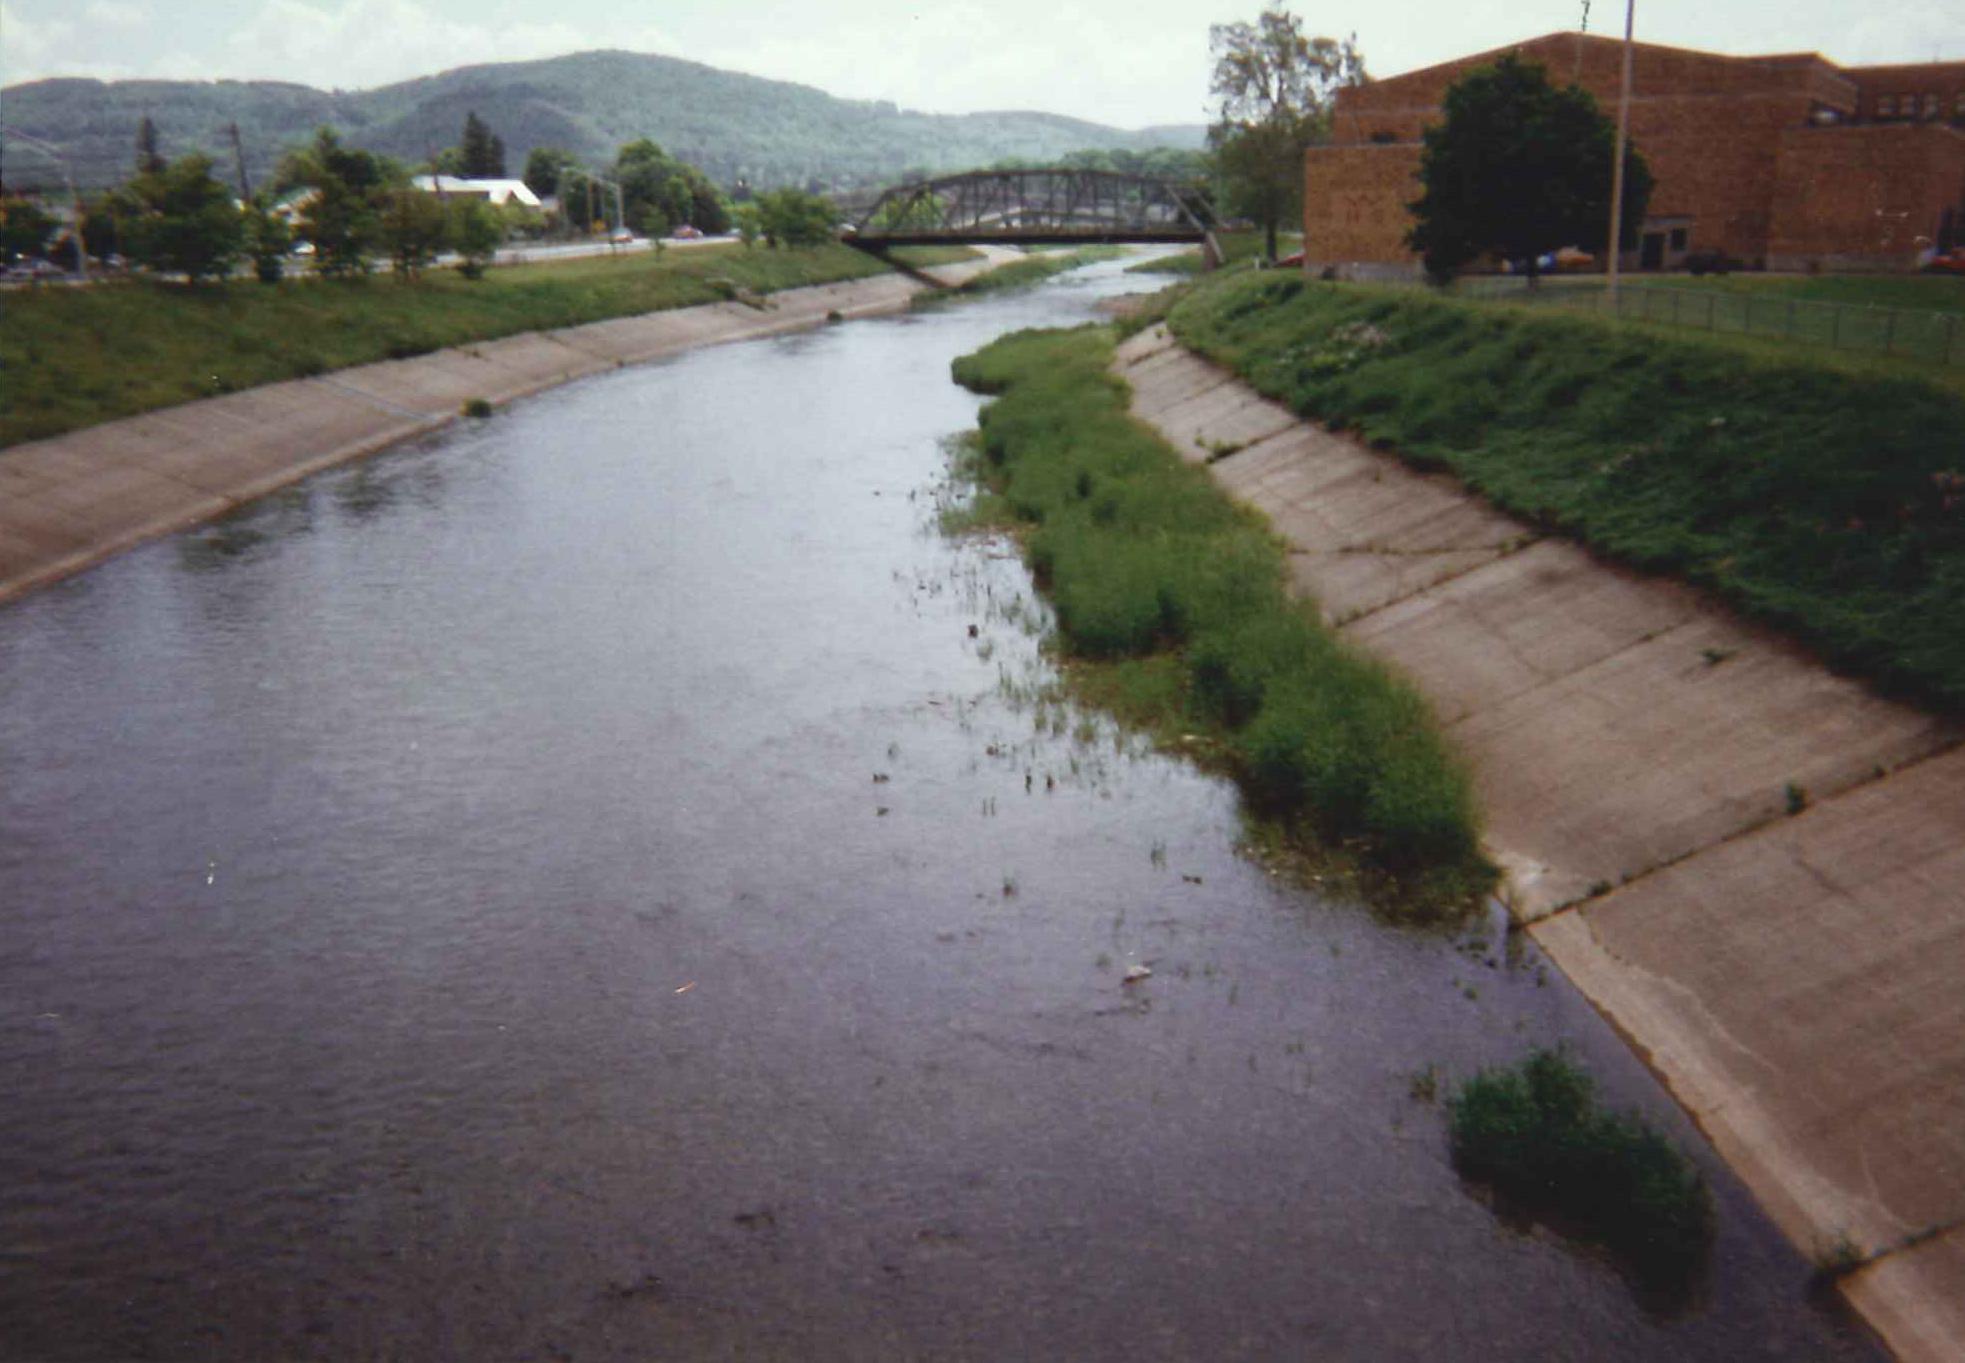 Photograph of the Genesee River at Wellsville, NY (WLLN6) looking upstream